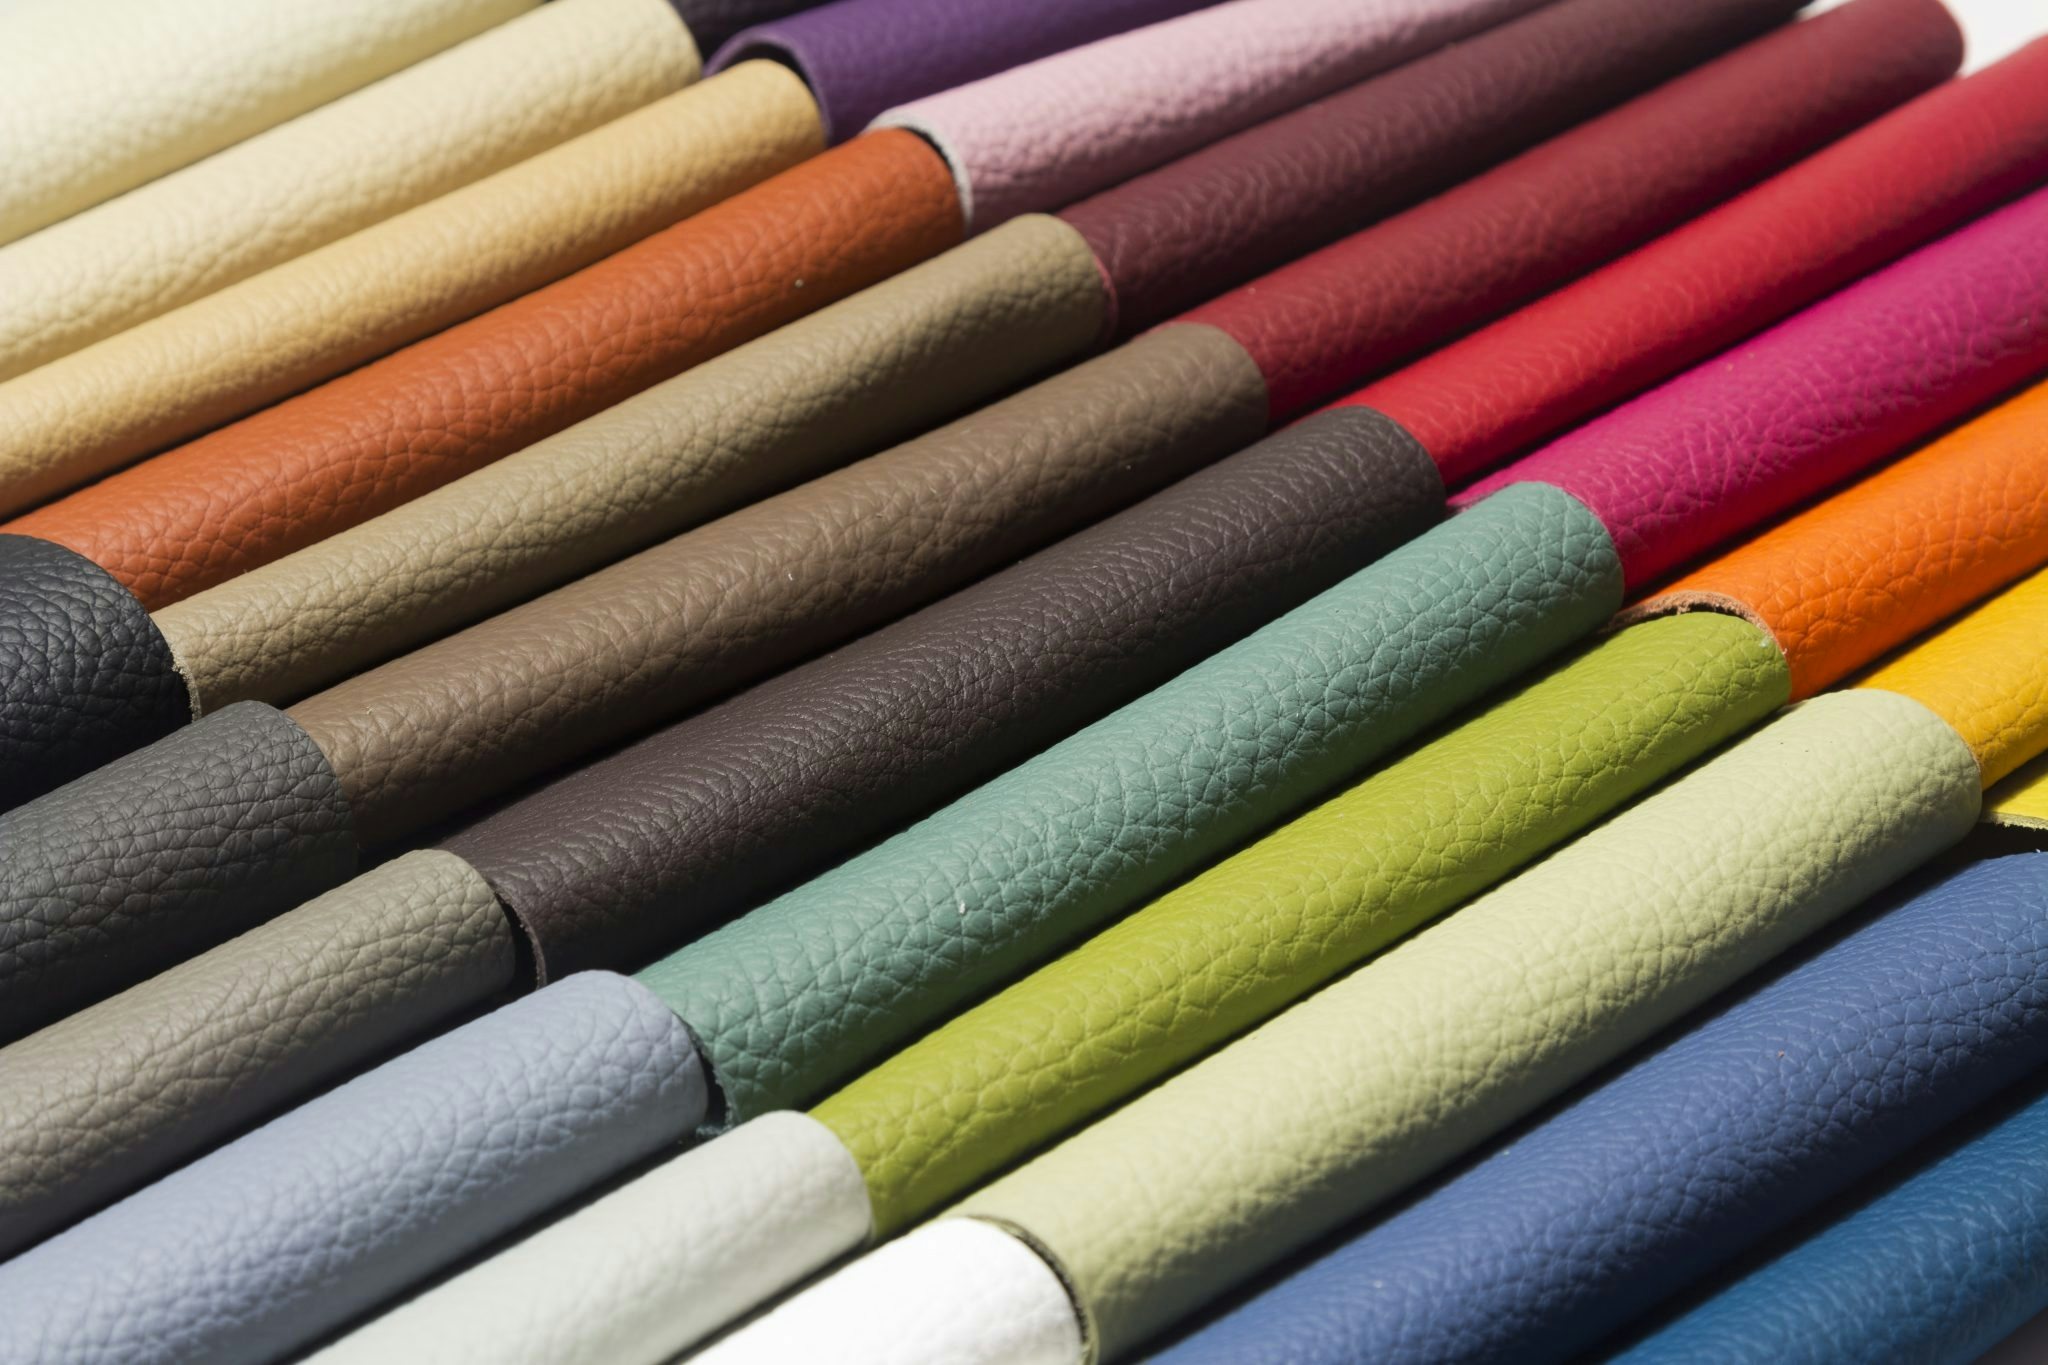 A good quality leather in various colors. Photo: Shutterstock